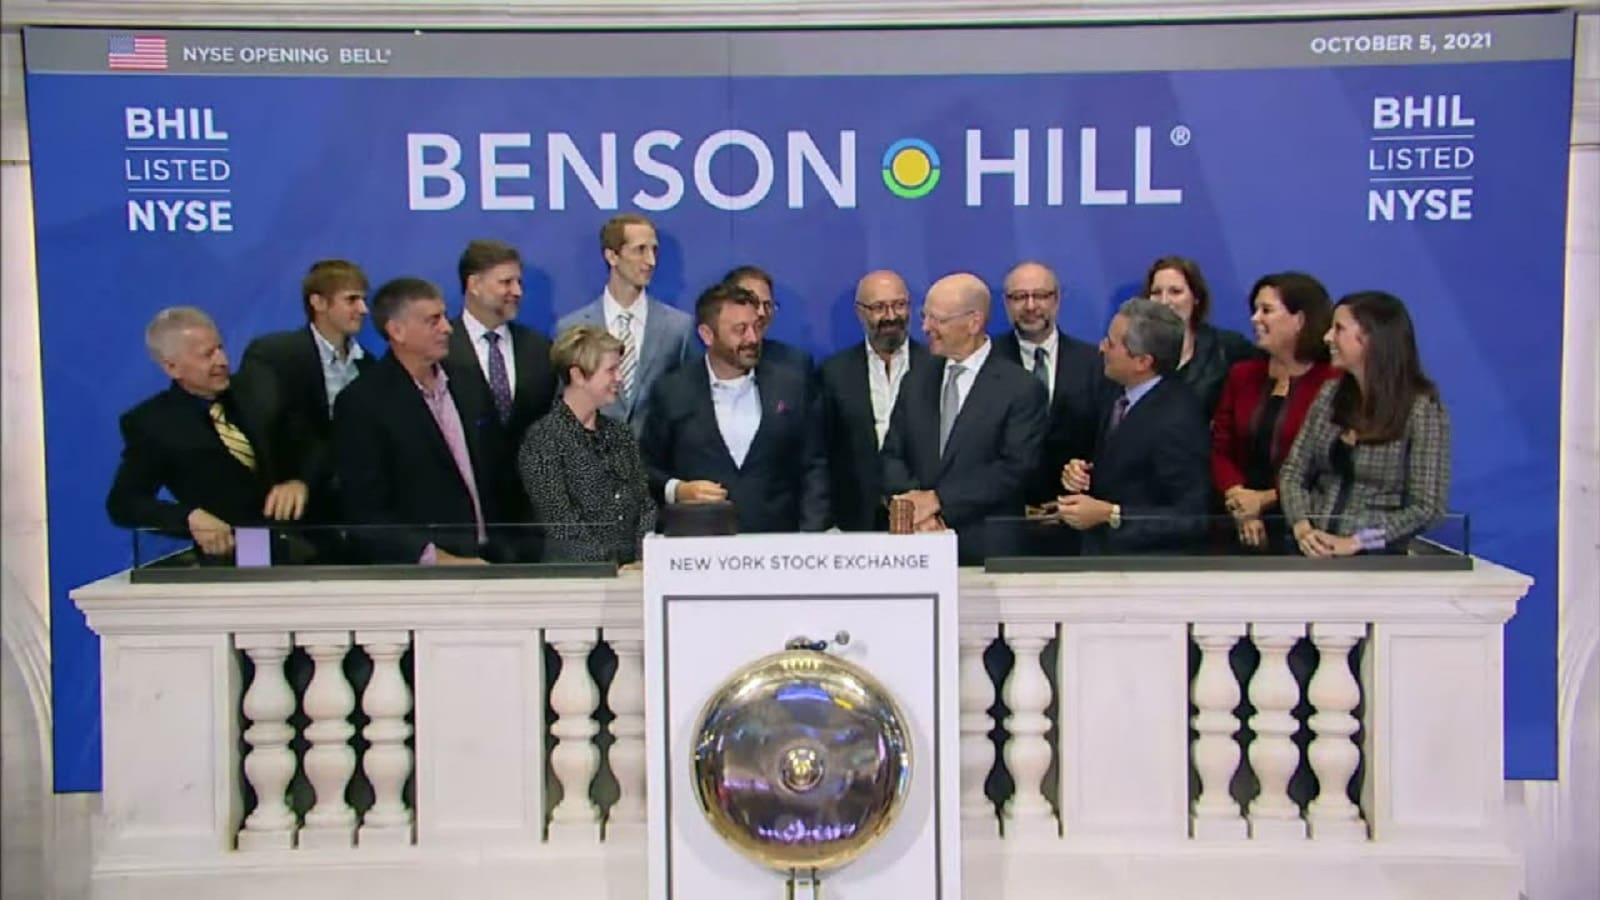 Benson Hill faces delisting for non-compliance with NYSE standards